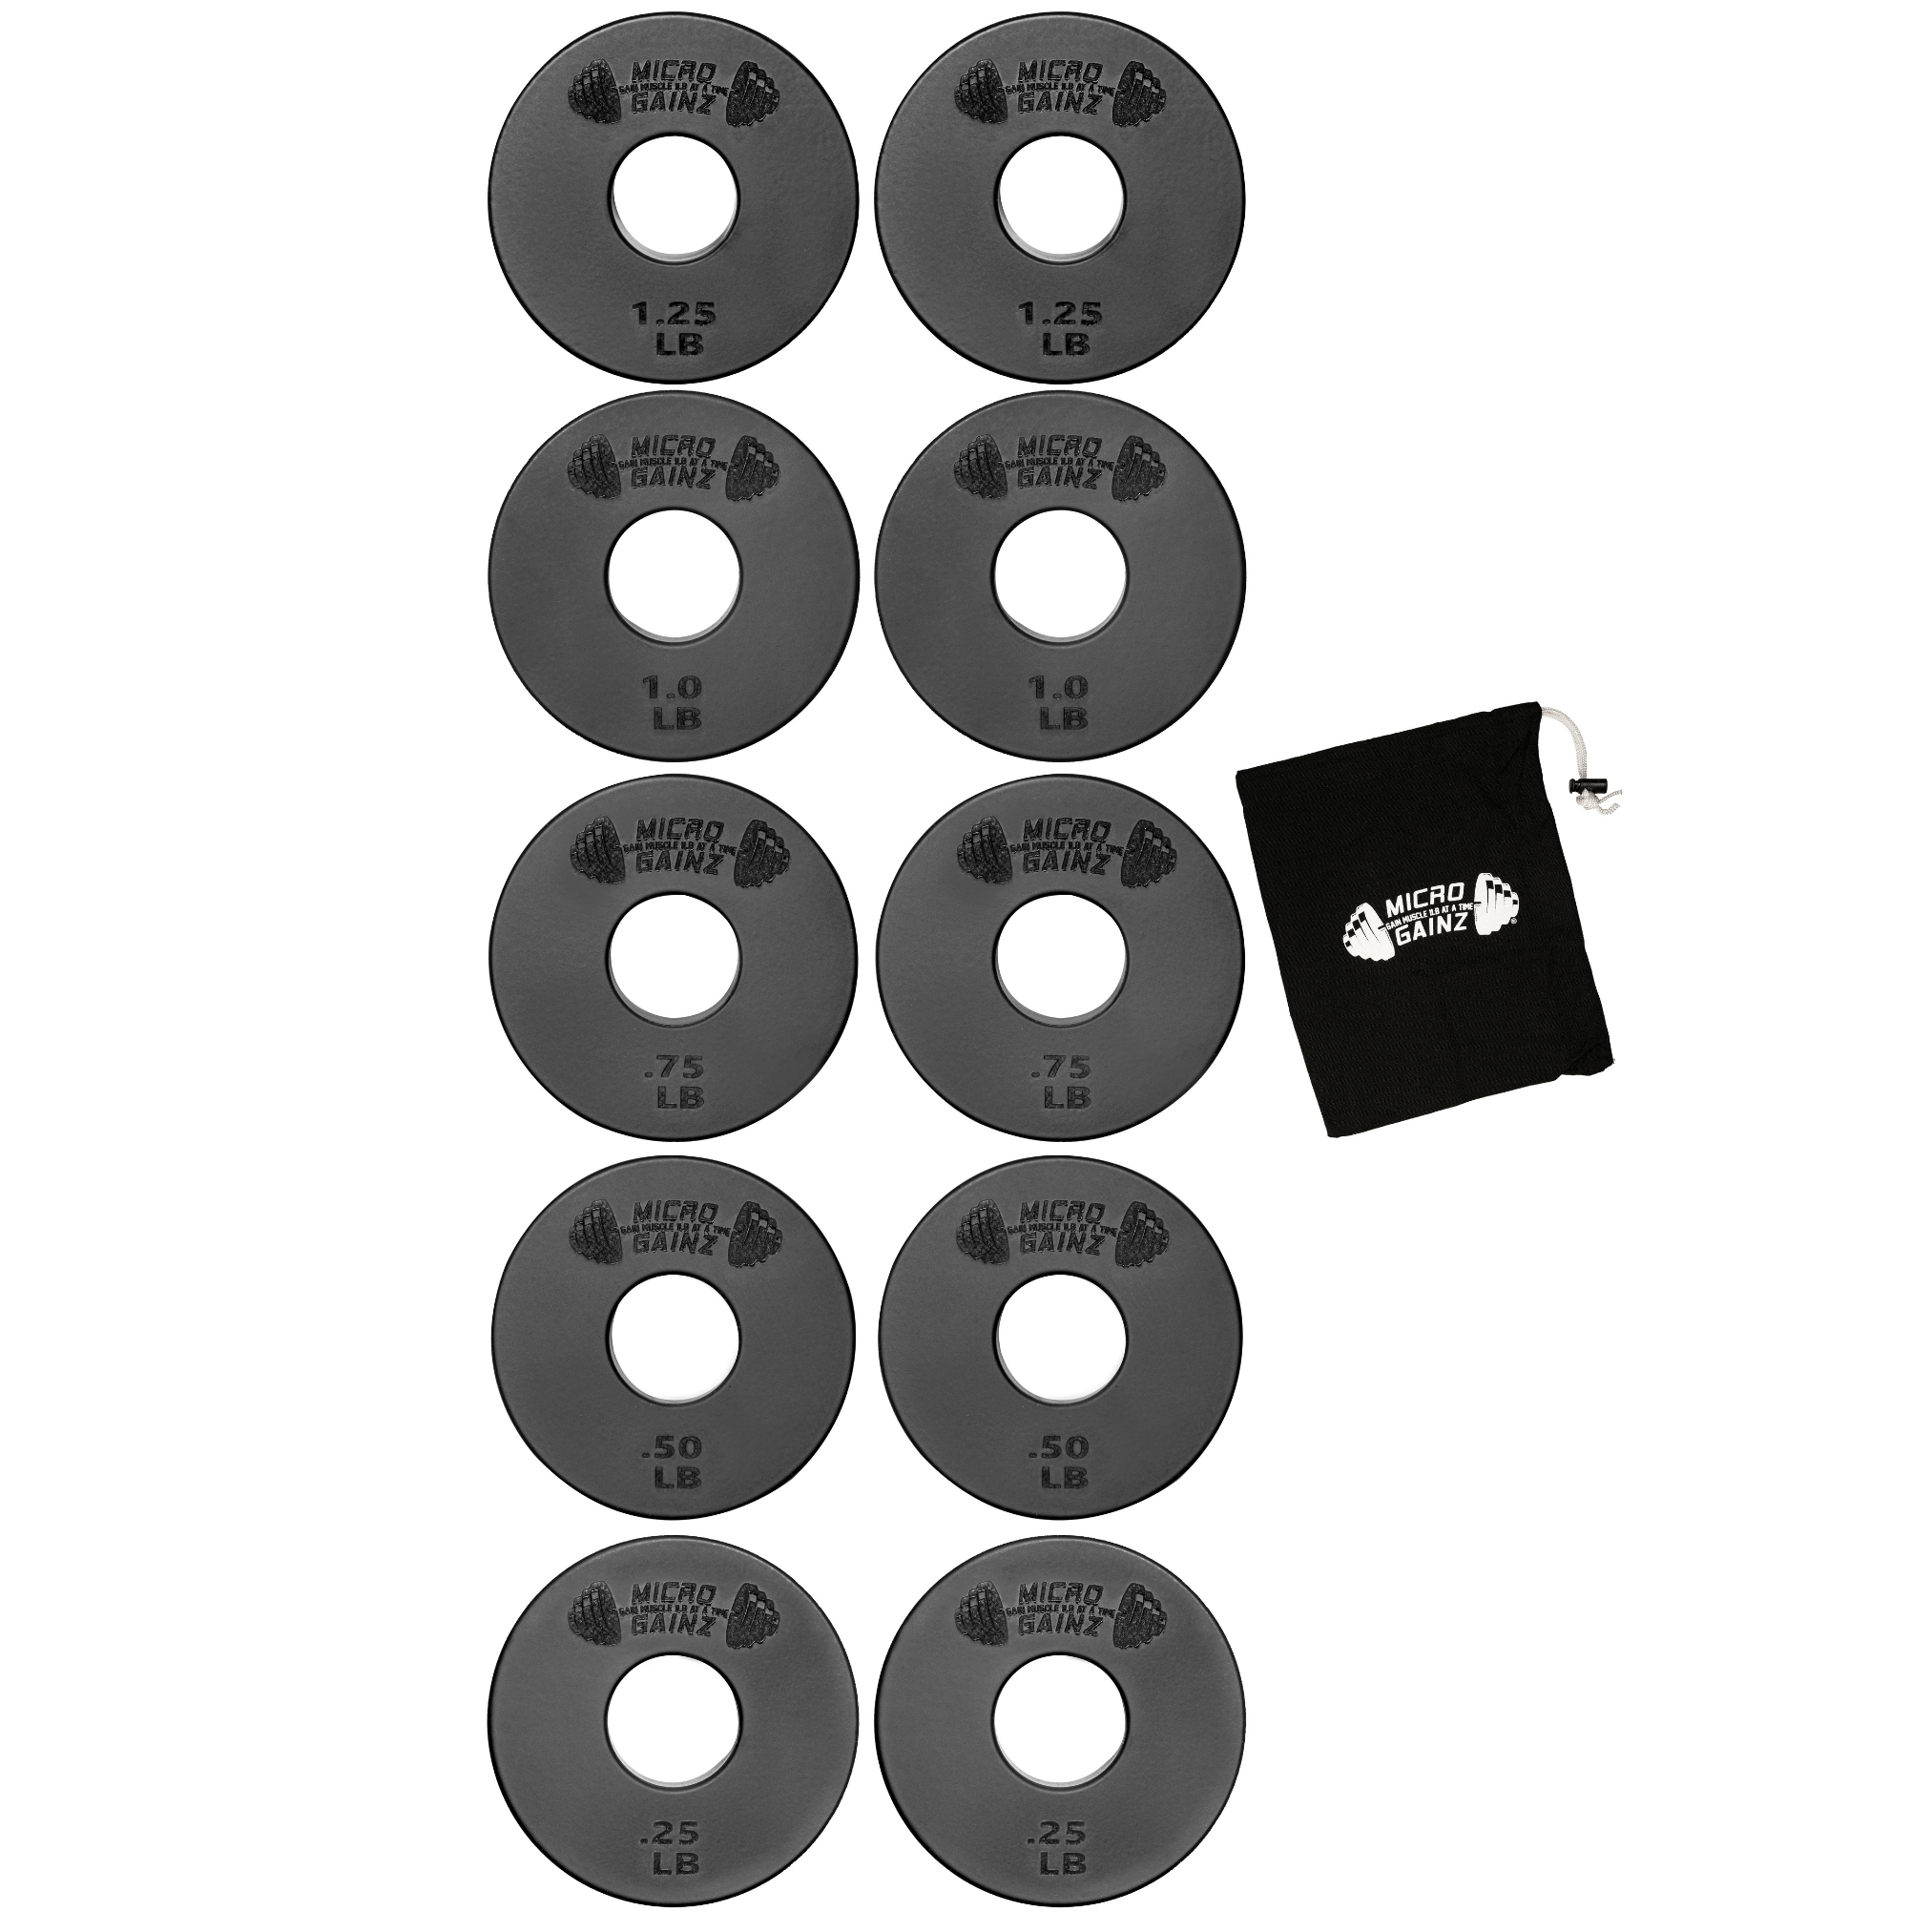 Micro Gainz Standard 1-Inch Center Hole Fractional Weight Plates Set of 10 Plates .25LB-1.25LB  w/ Bag